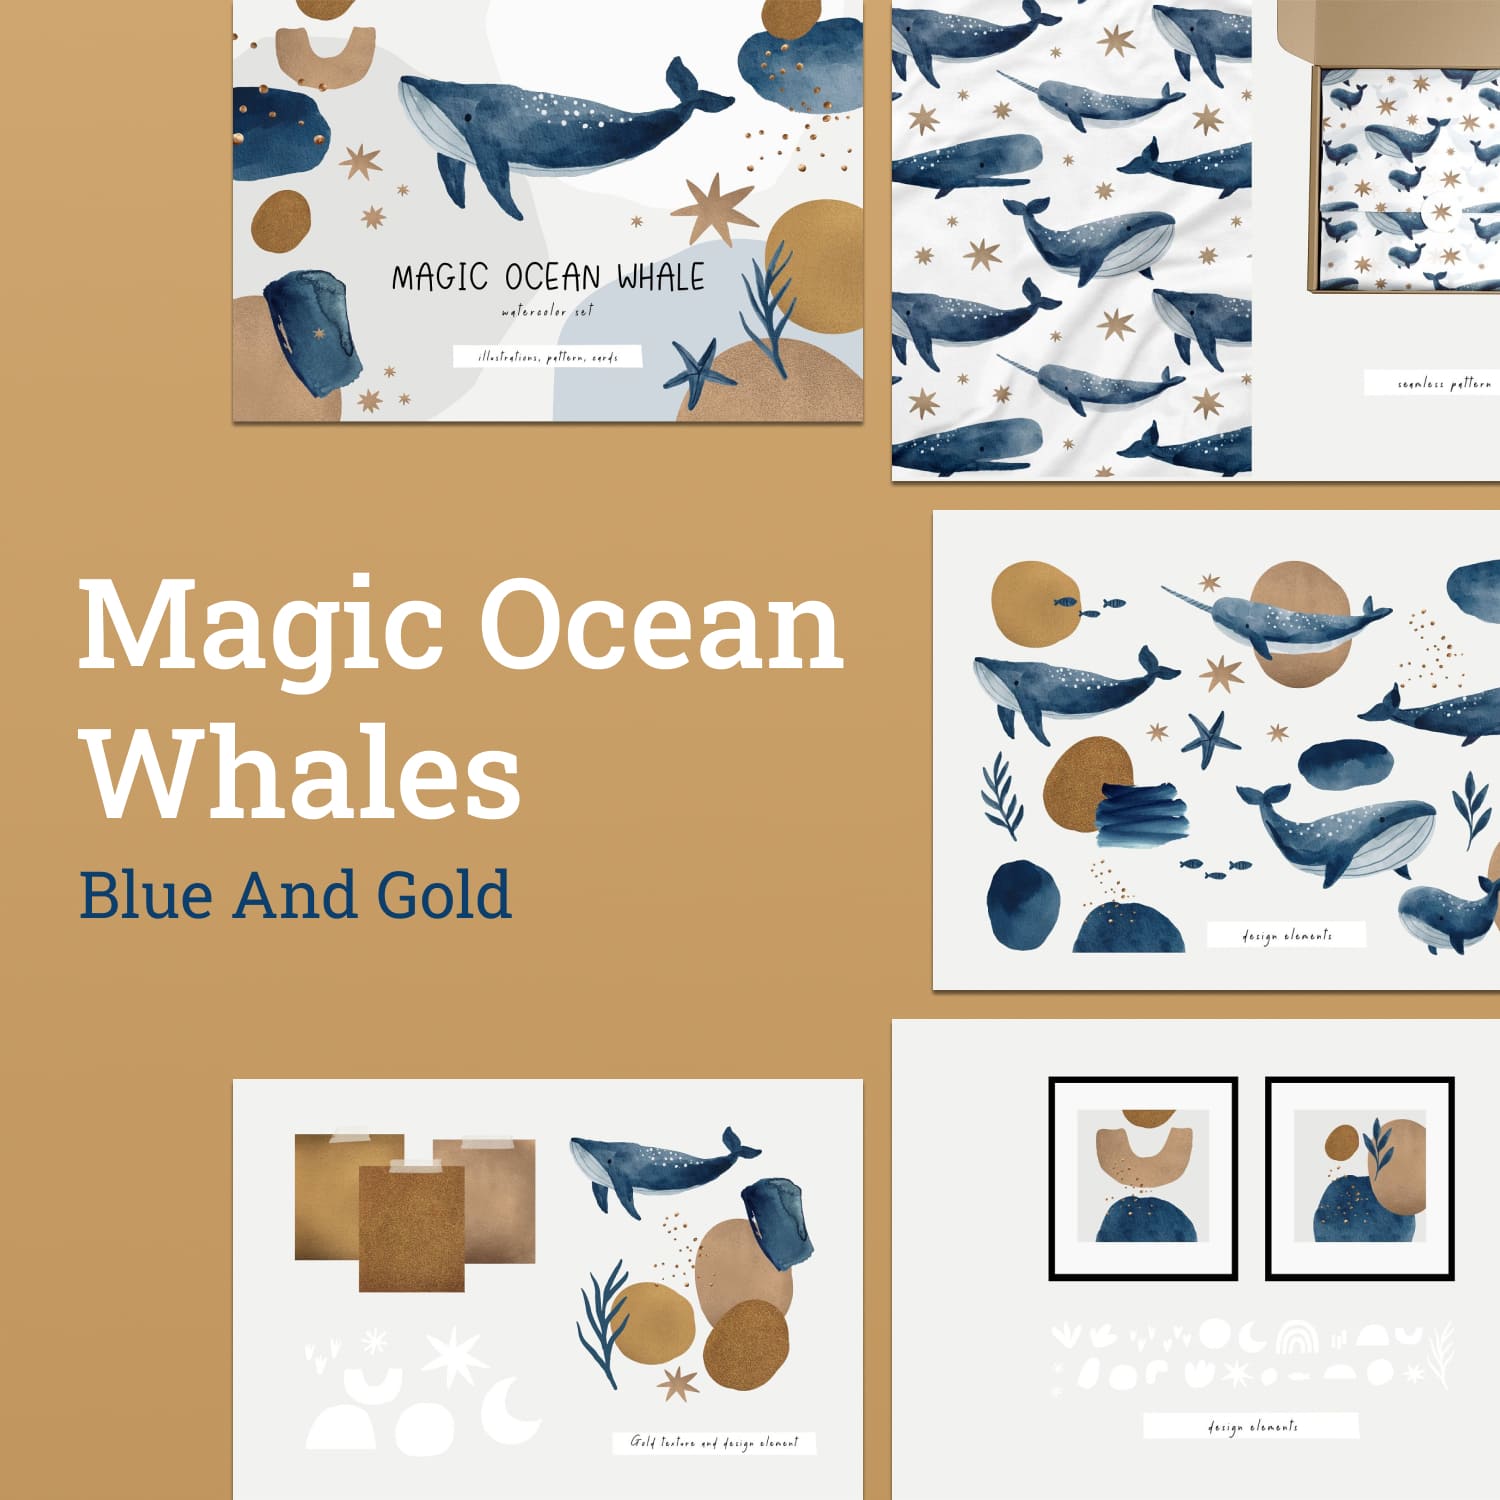 Magic Ocean Whales. Blue And Gold cover image.